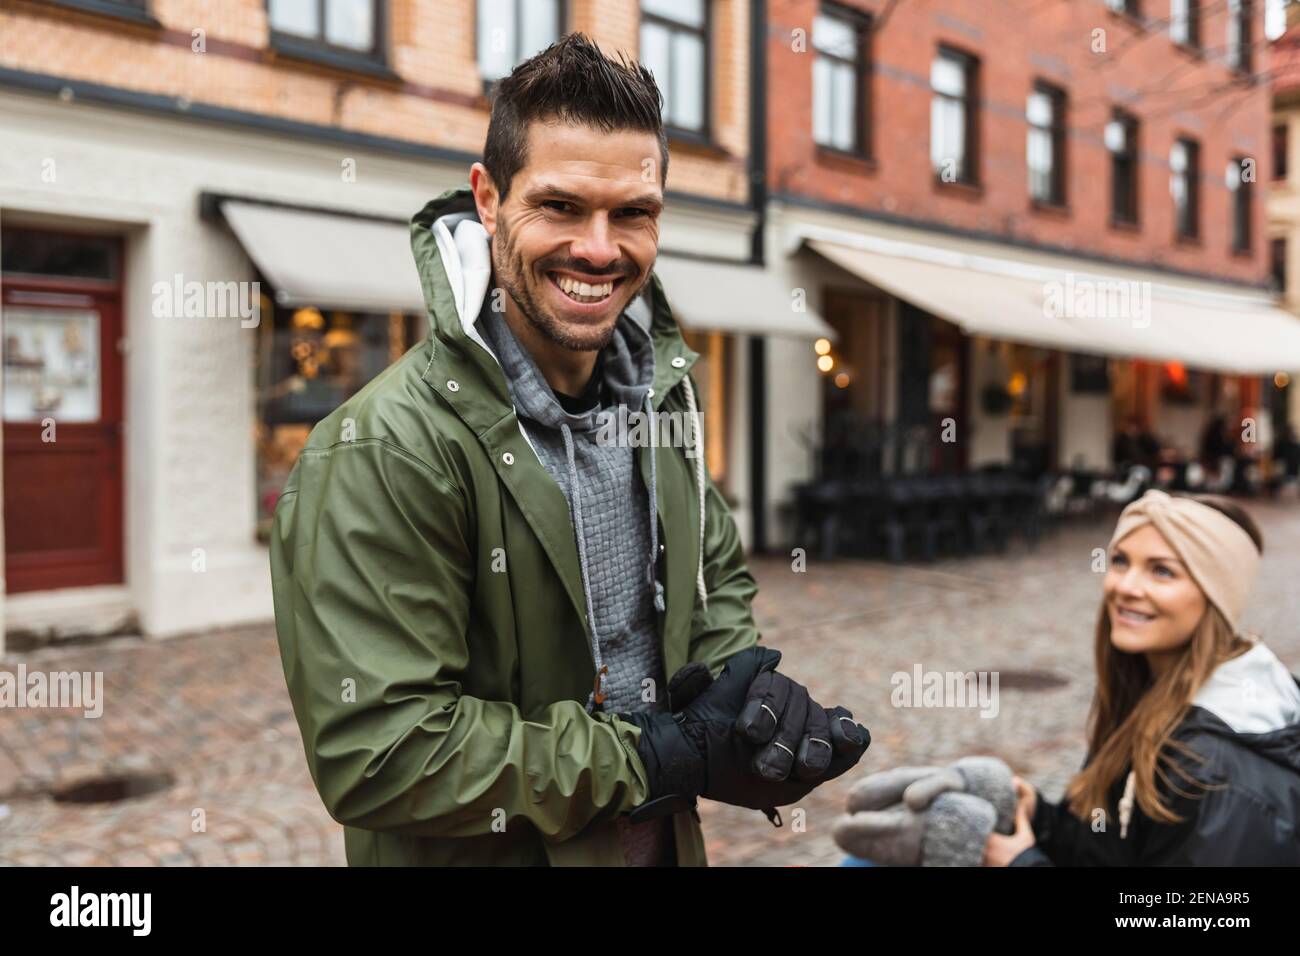 Portrait of smiling man with woman on street in city Stock Photo